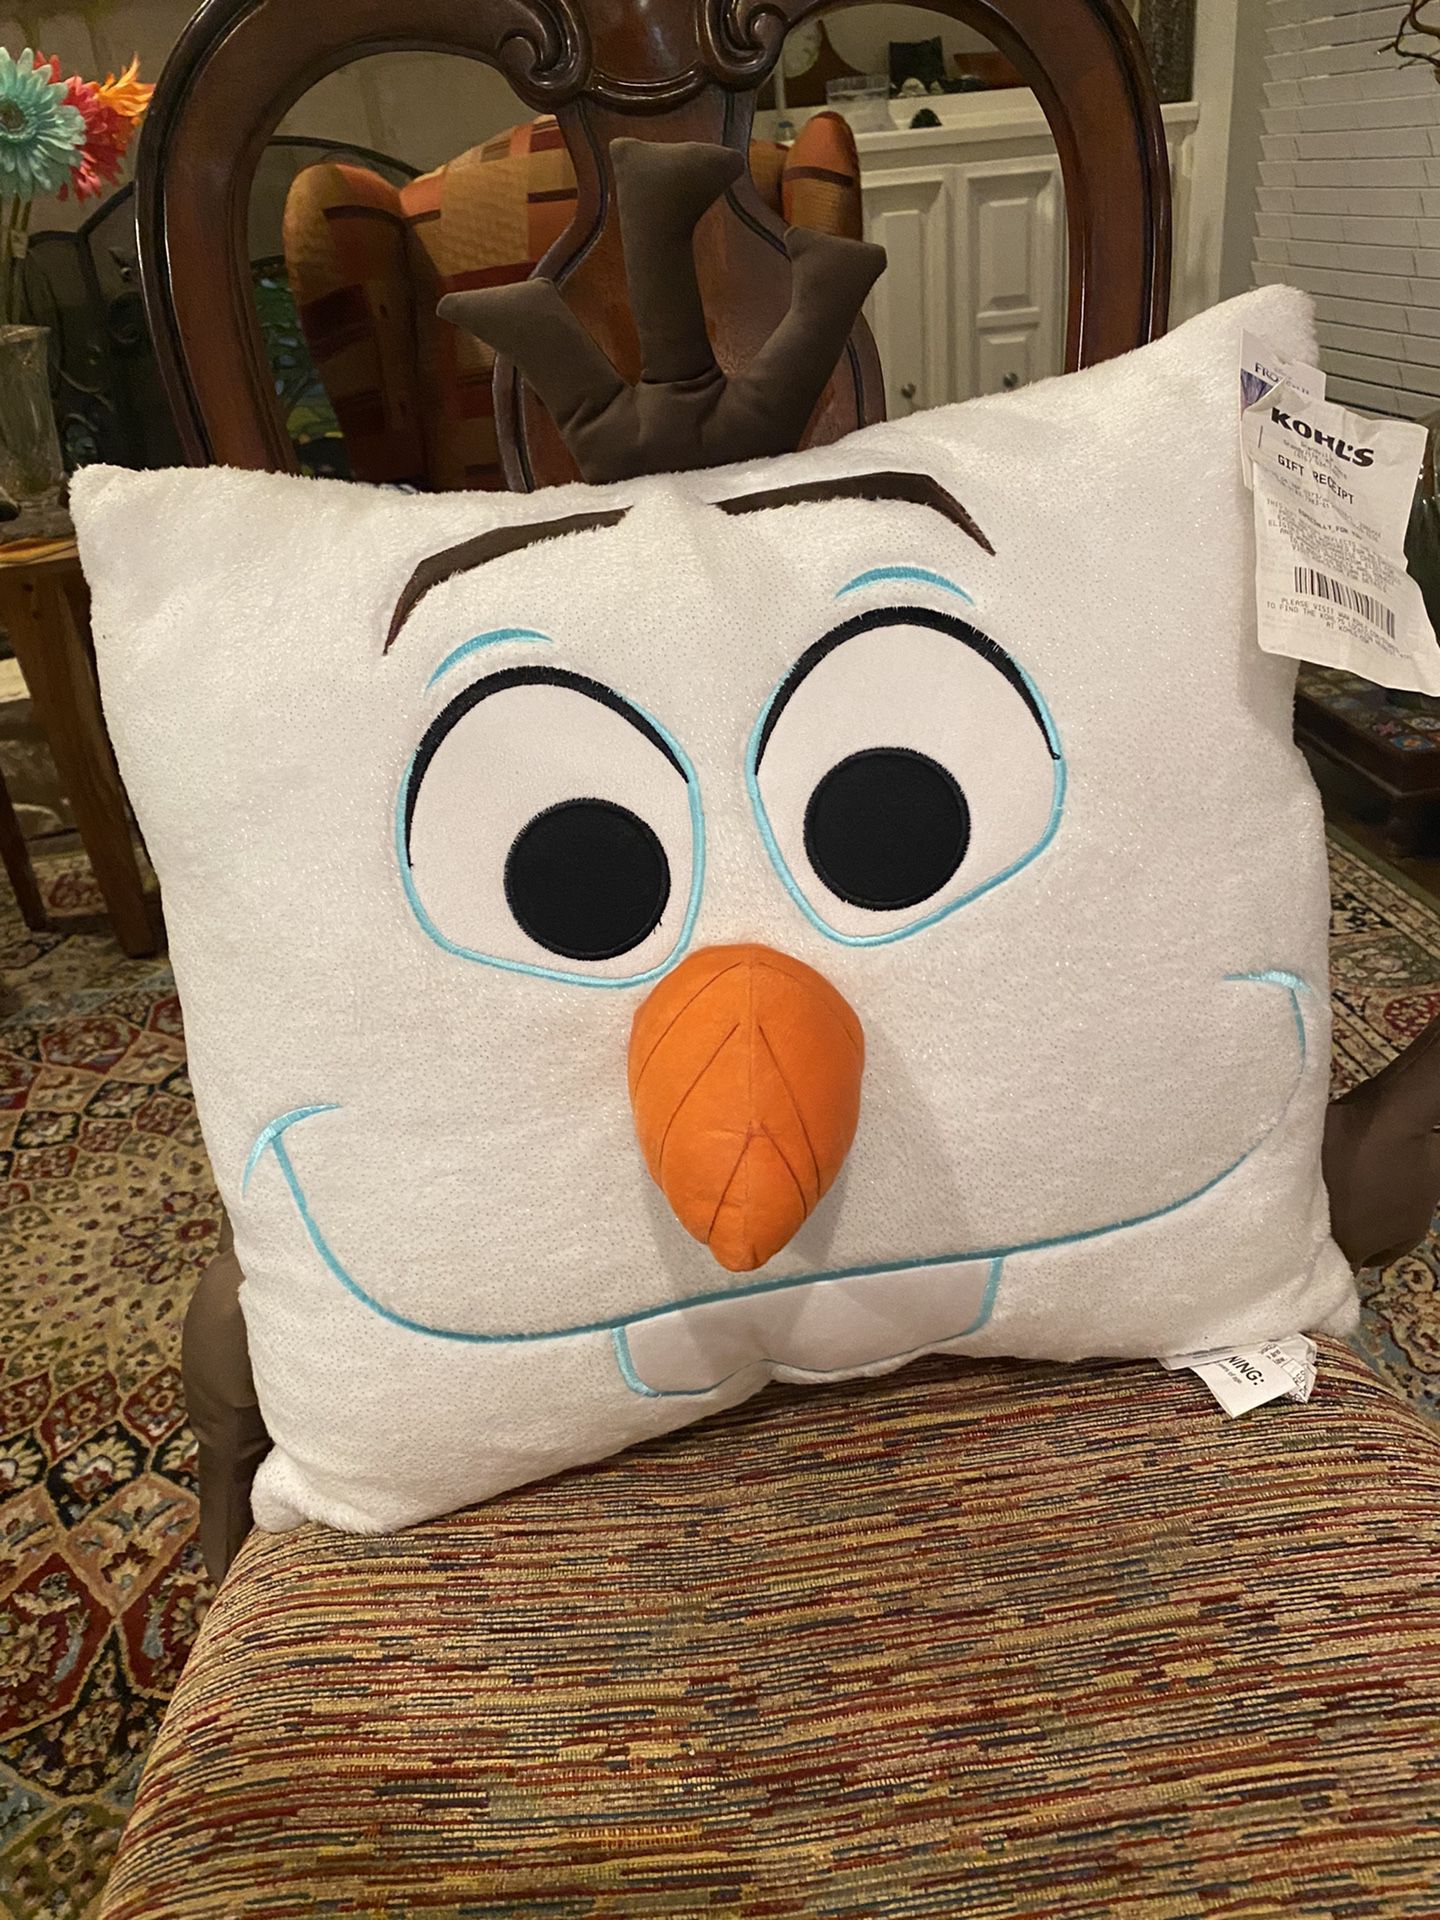 New Large Olaf Pillow 